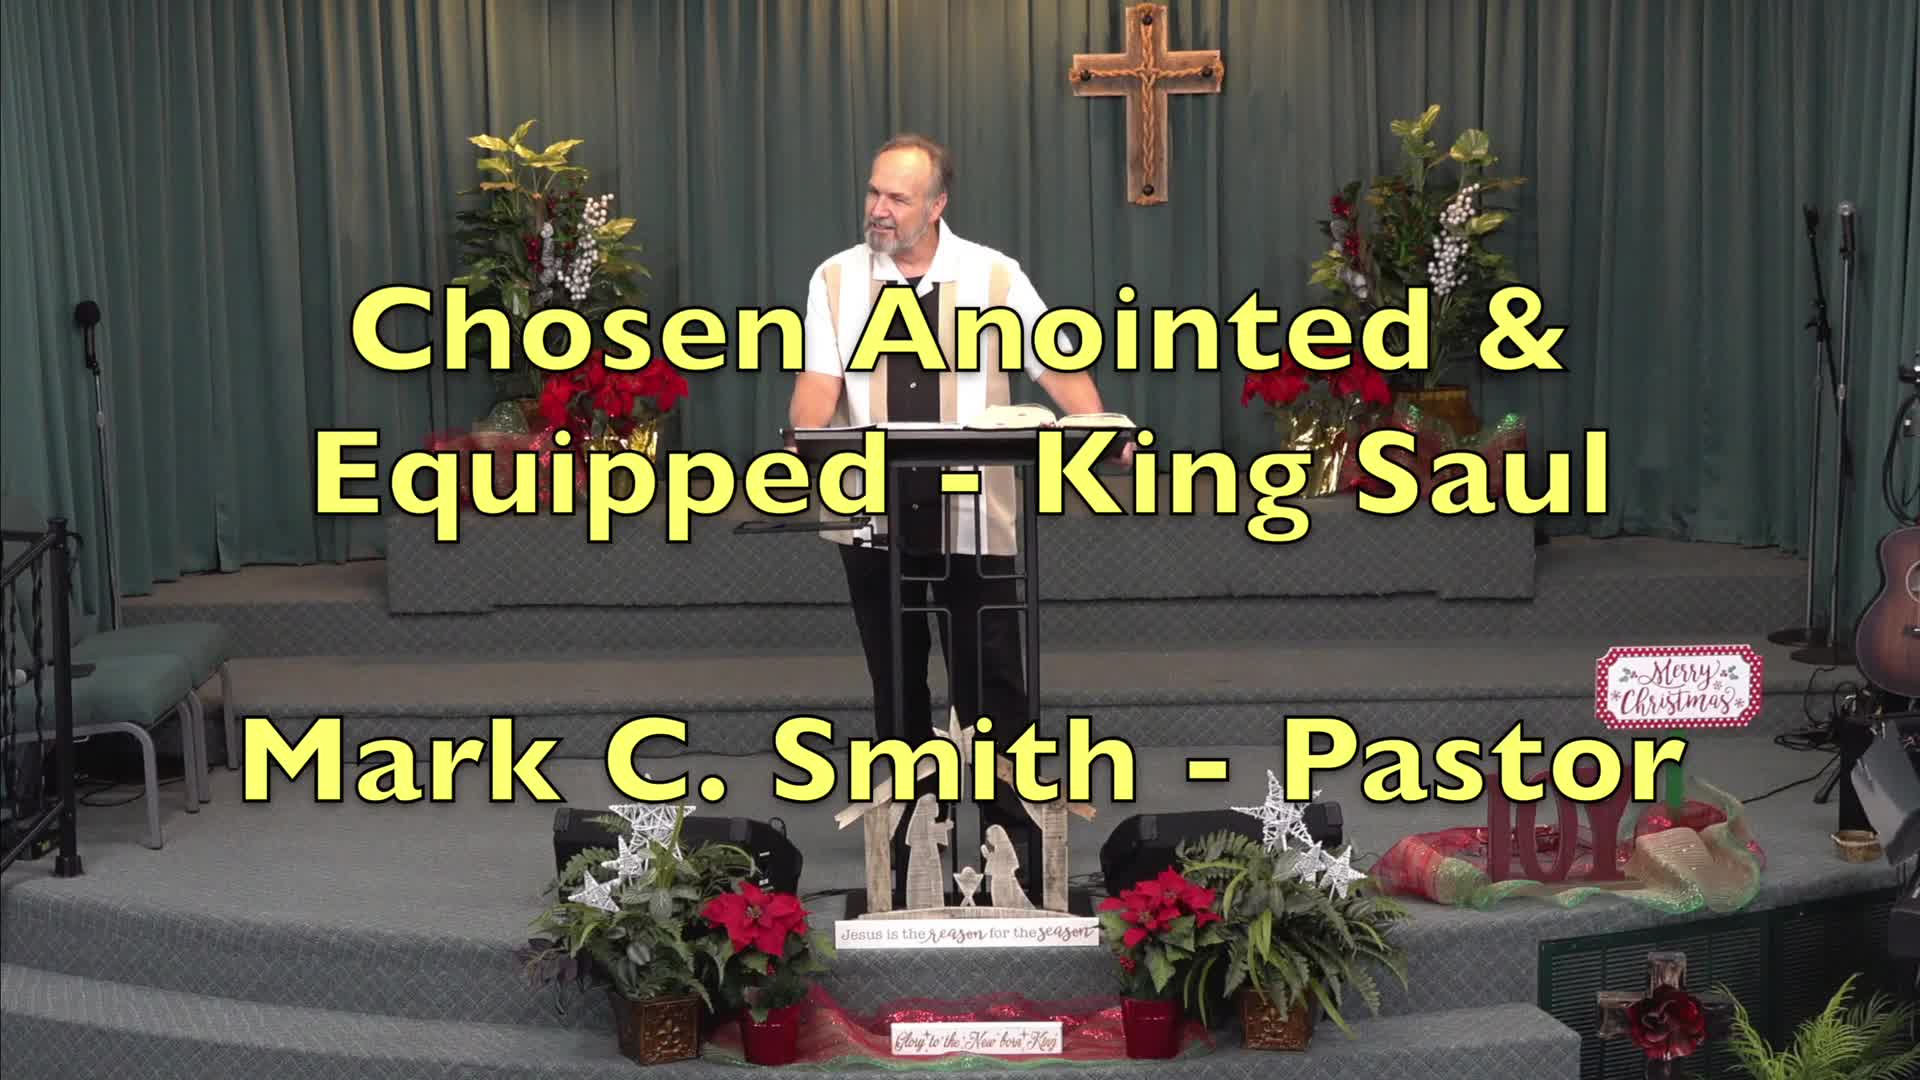 Chosen Anointed and Equipped - King Saul